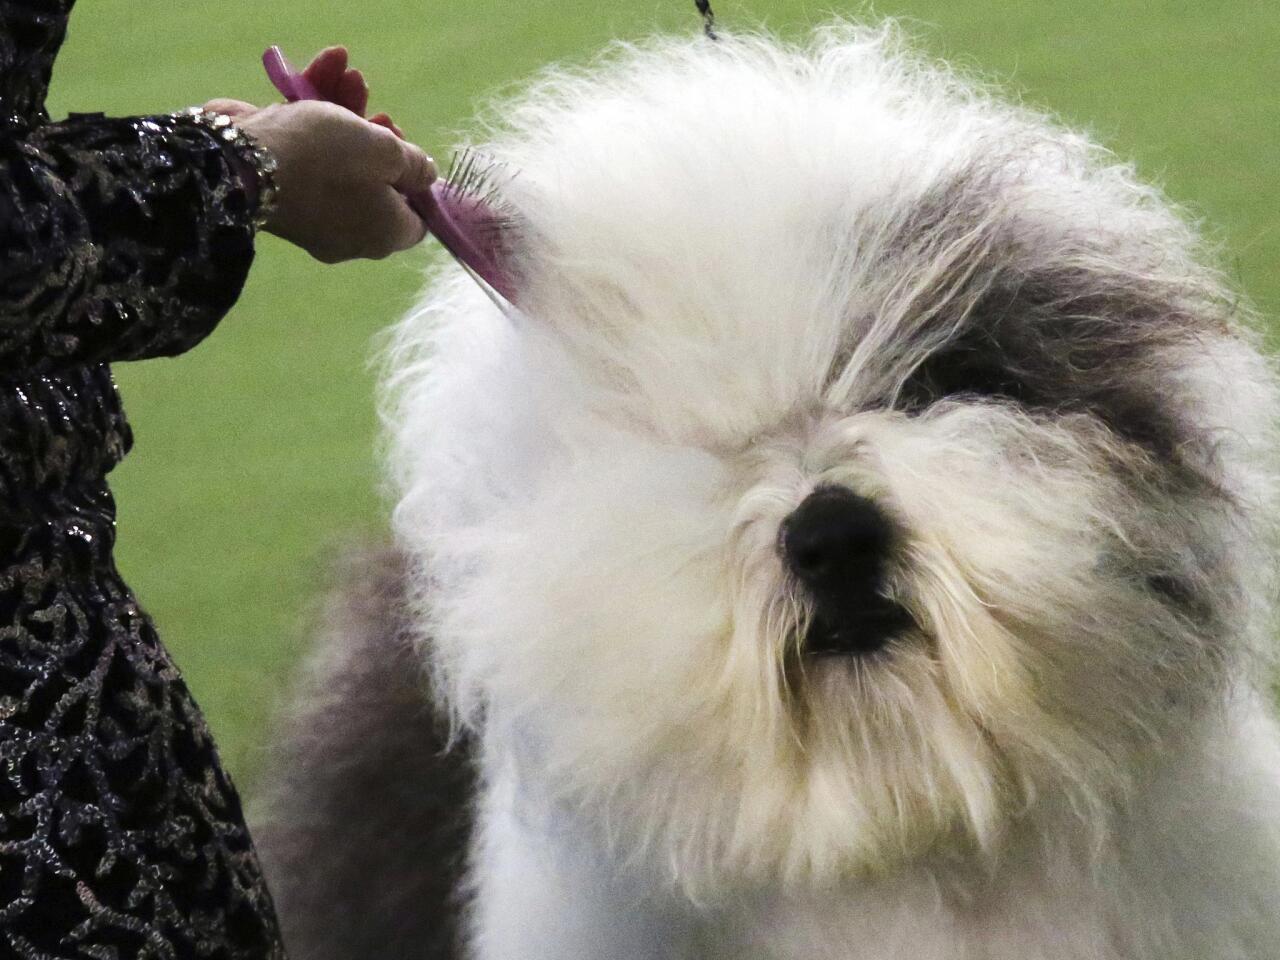 143rd Westminster Kennel Club Dog Show in New York